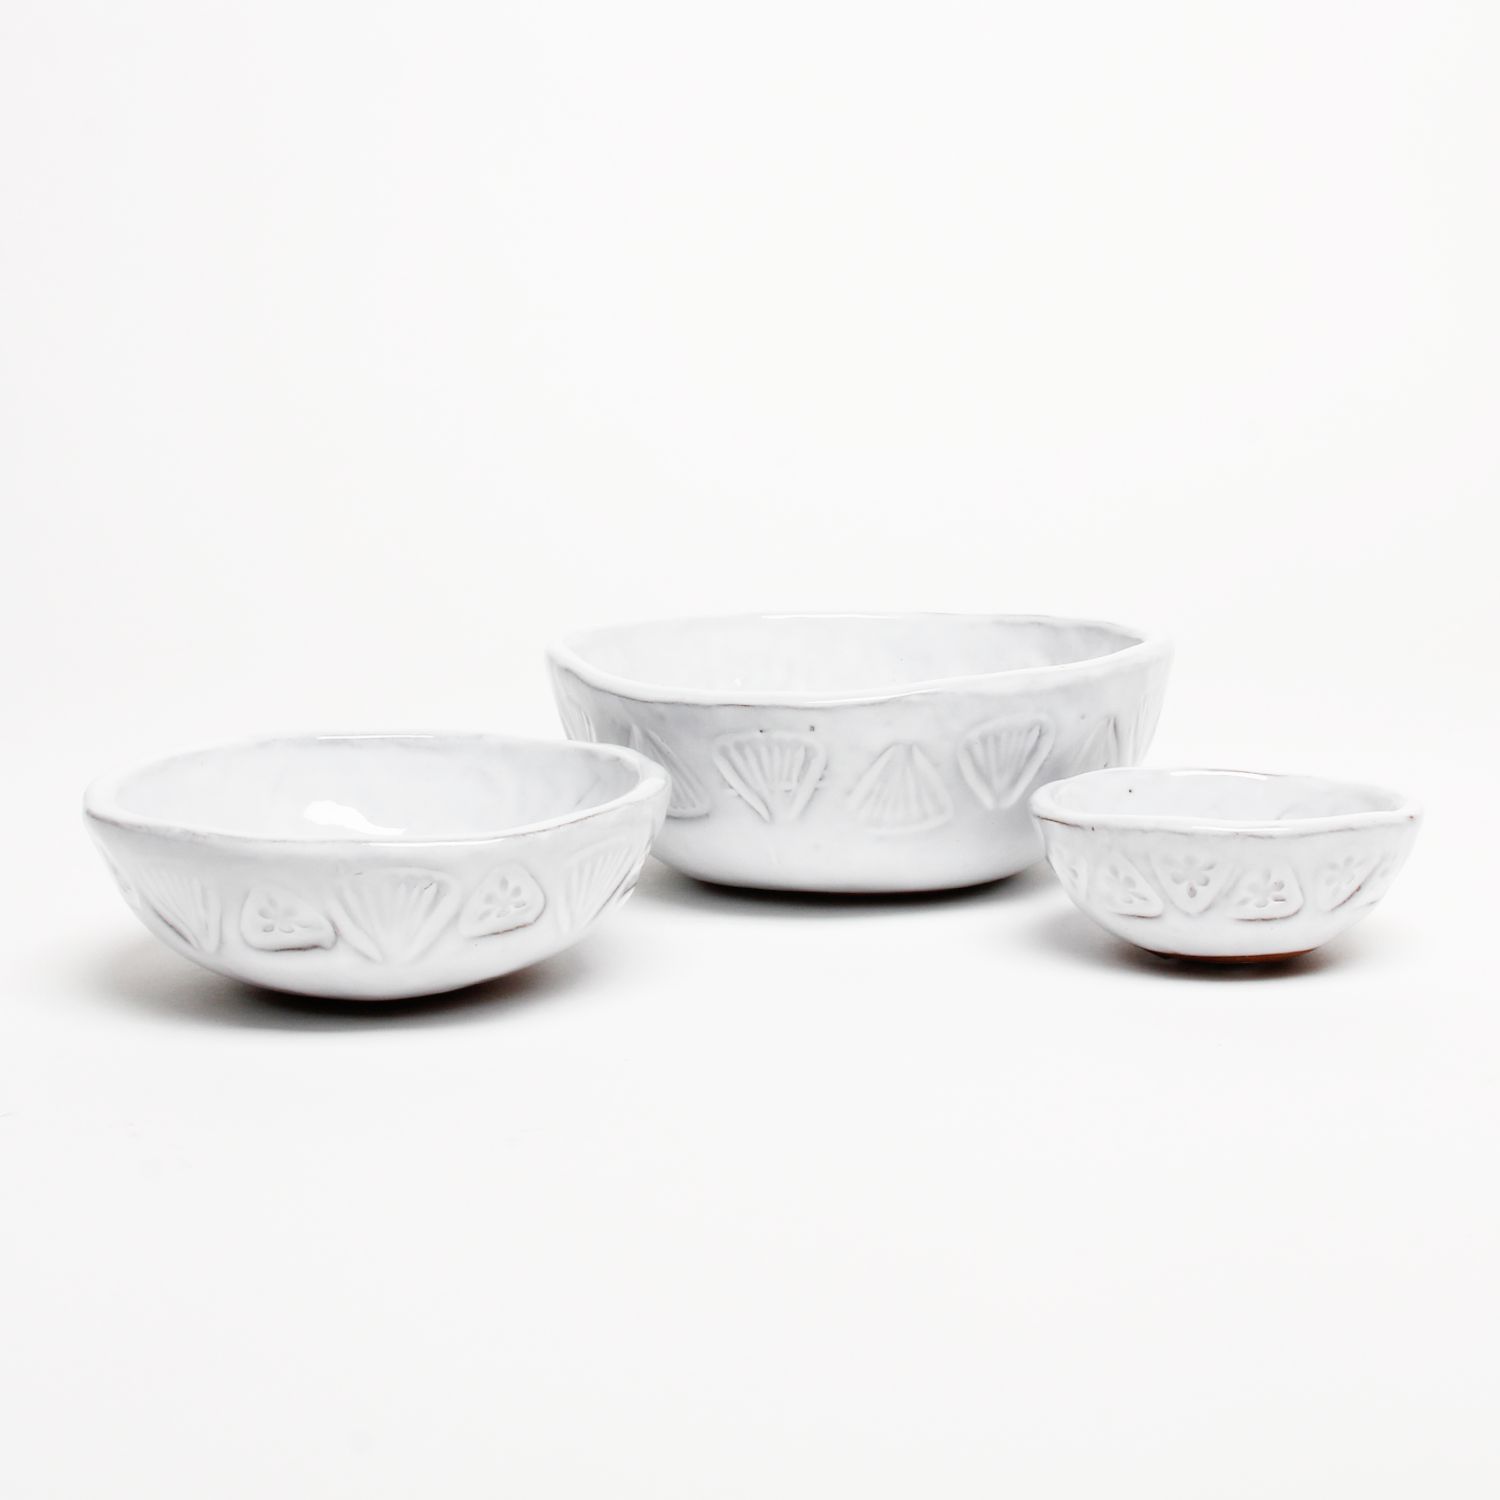 Jacquie Blondin: Nesting Bowl with Carved X Design (Set of 3) Product Image 1 of 4